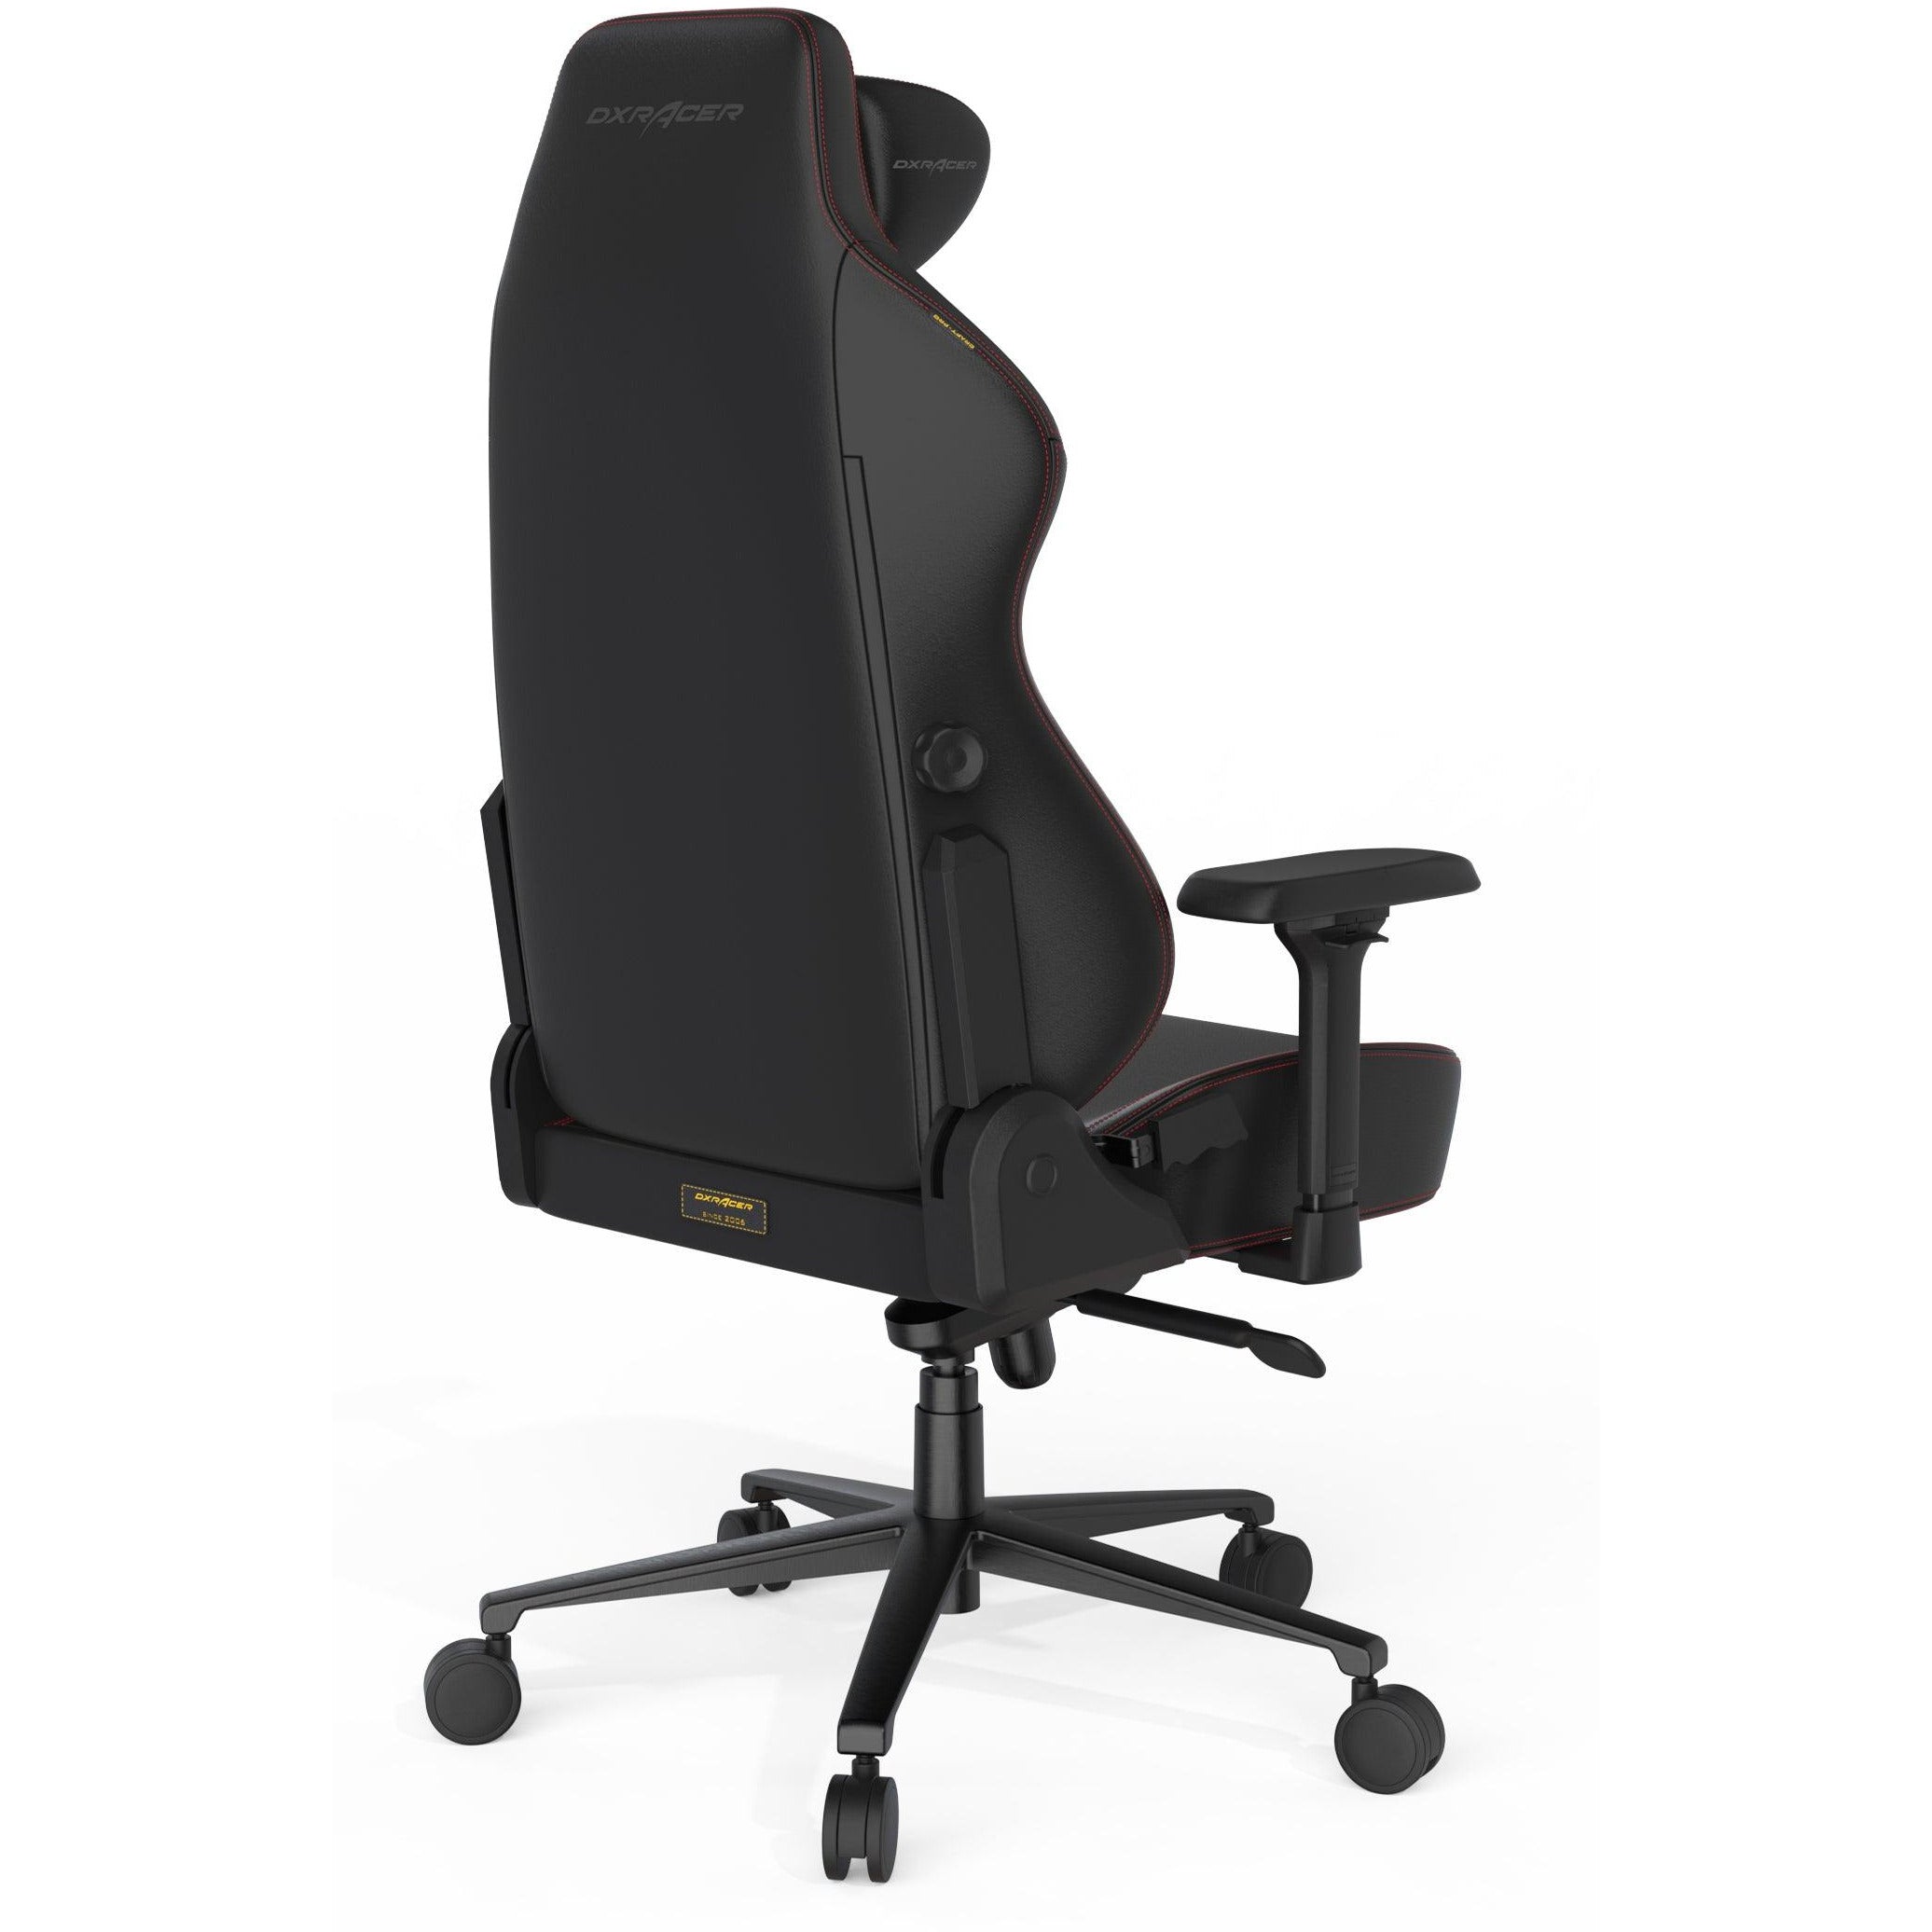 DXRacer Craft D5000 Gold and Black Gaming Chair